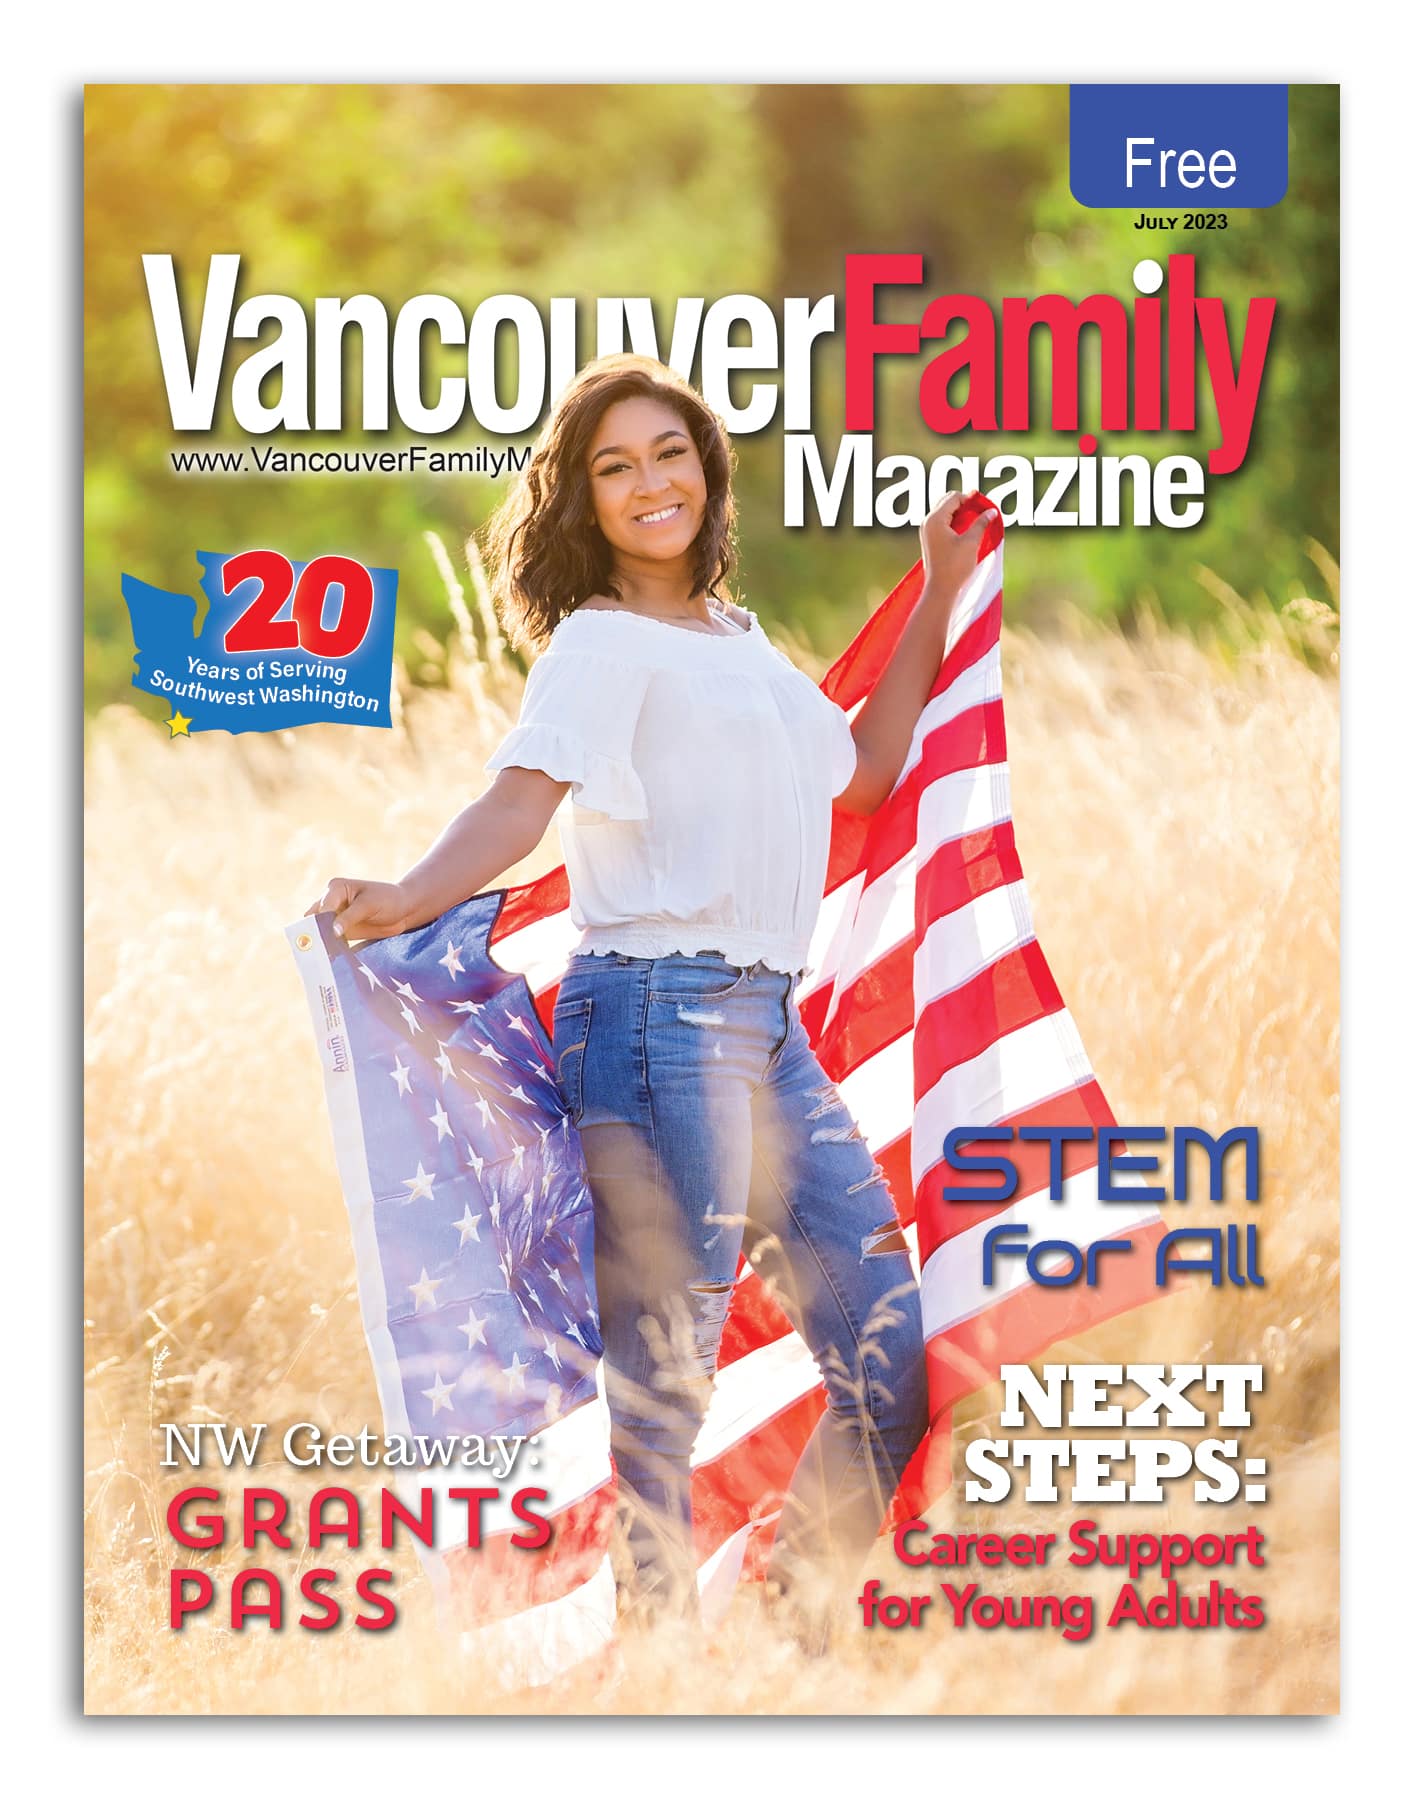 Vancouver Family Magazine's July 2023 issue features a young woman holding an American flag outside